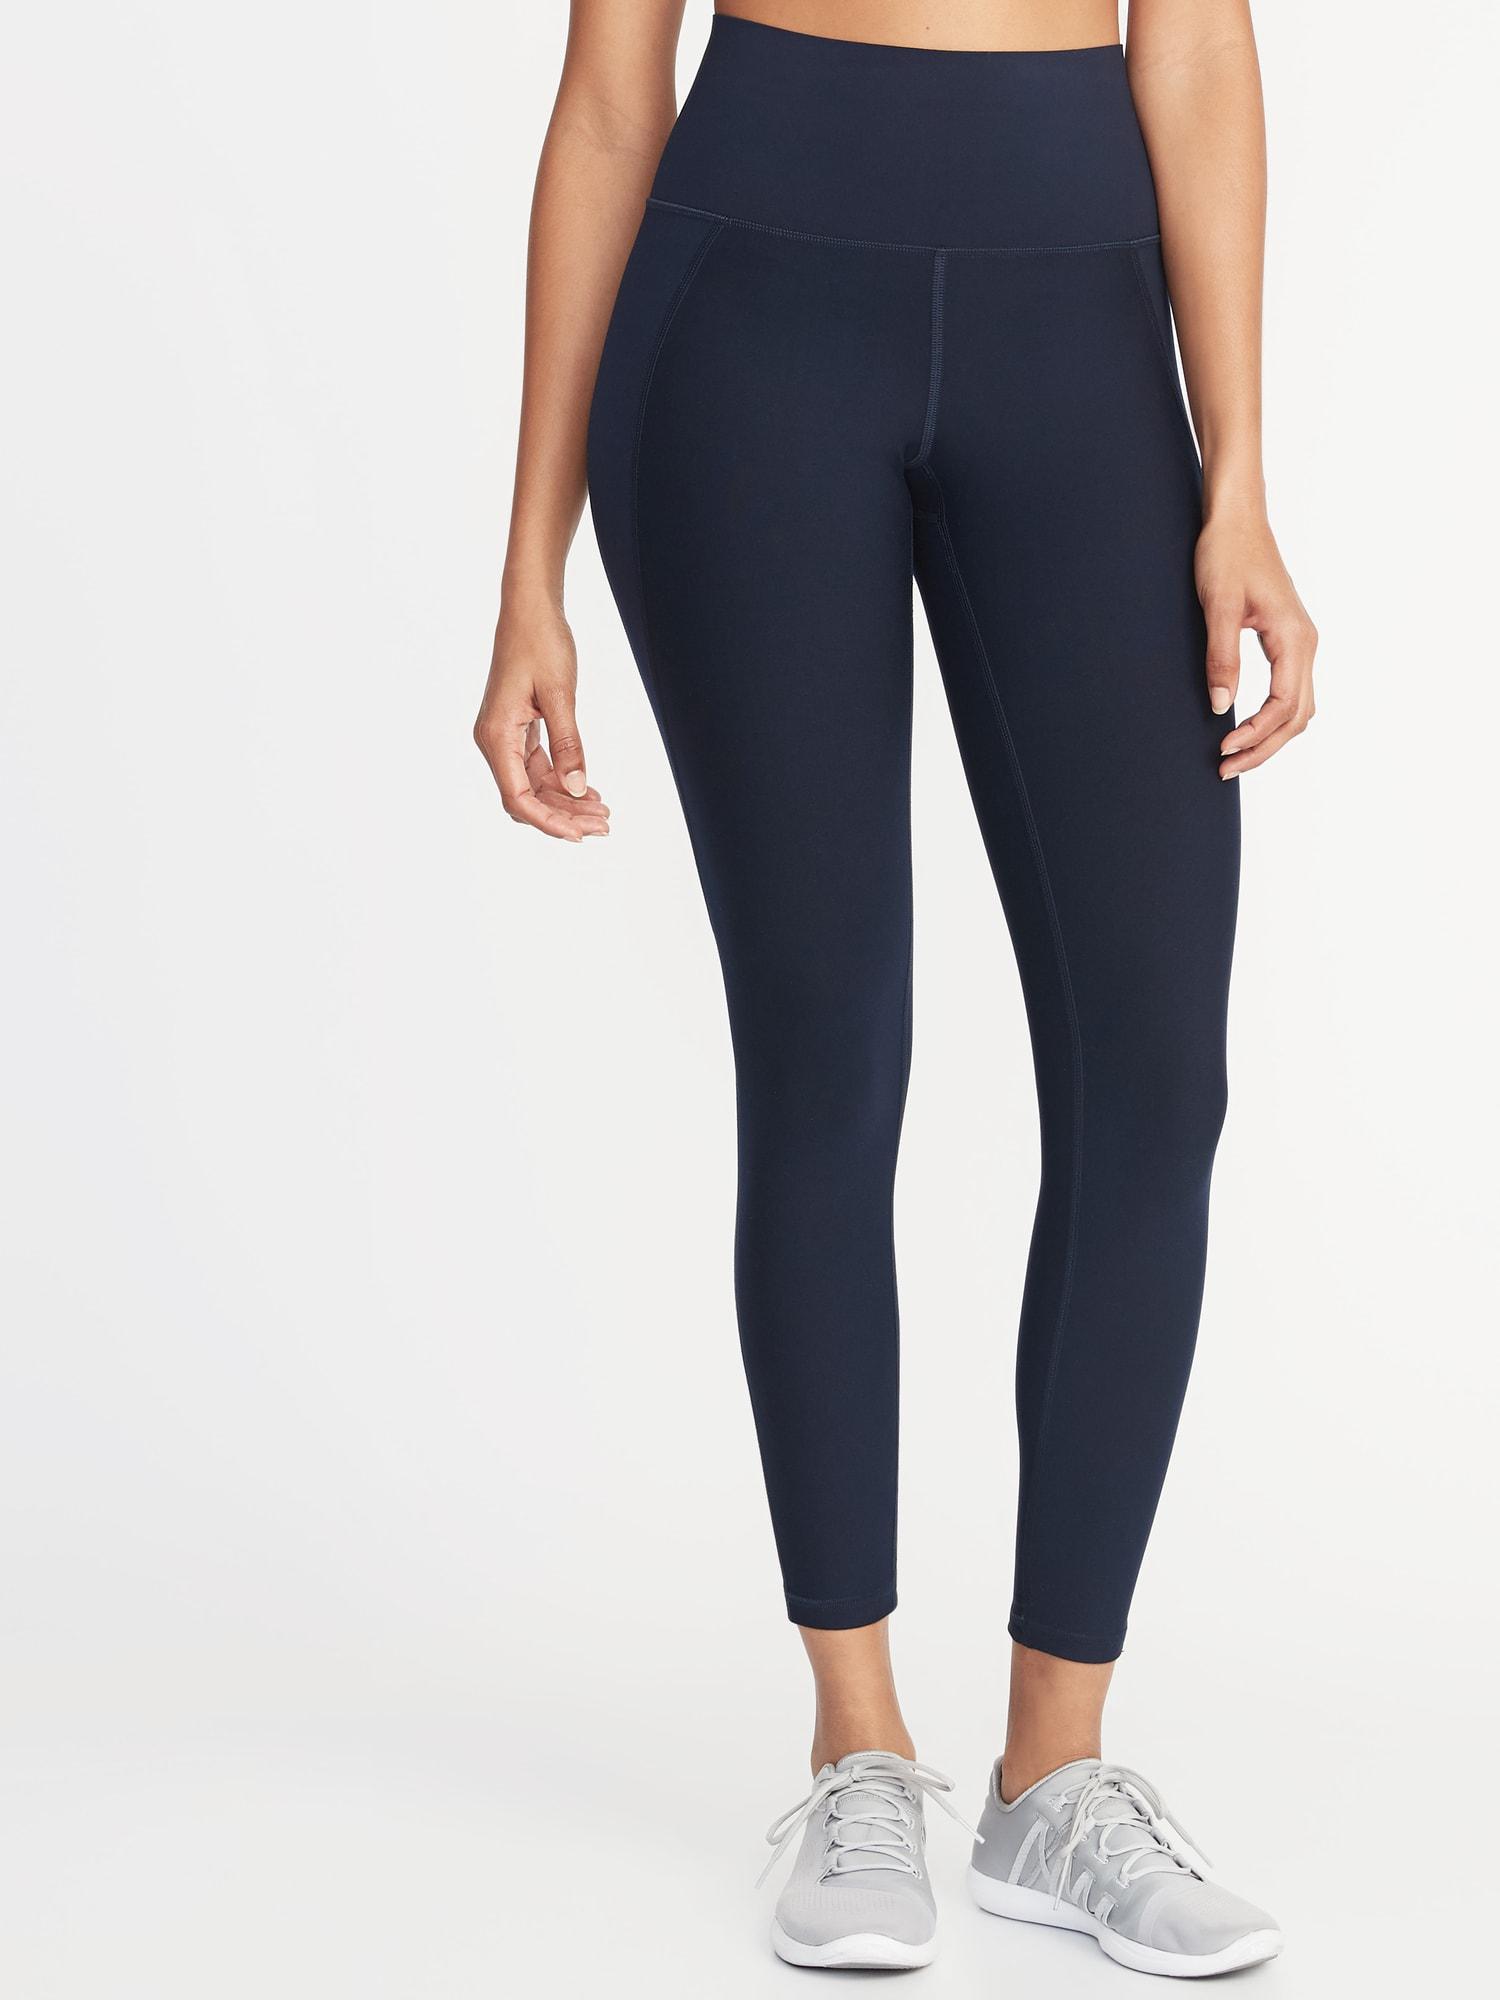 Leggings For Women Old Navy  International Society of Precision Agriculture